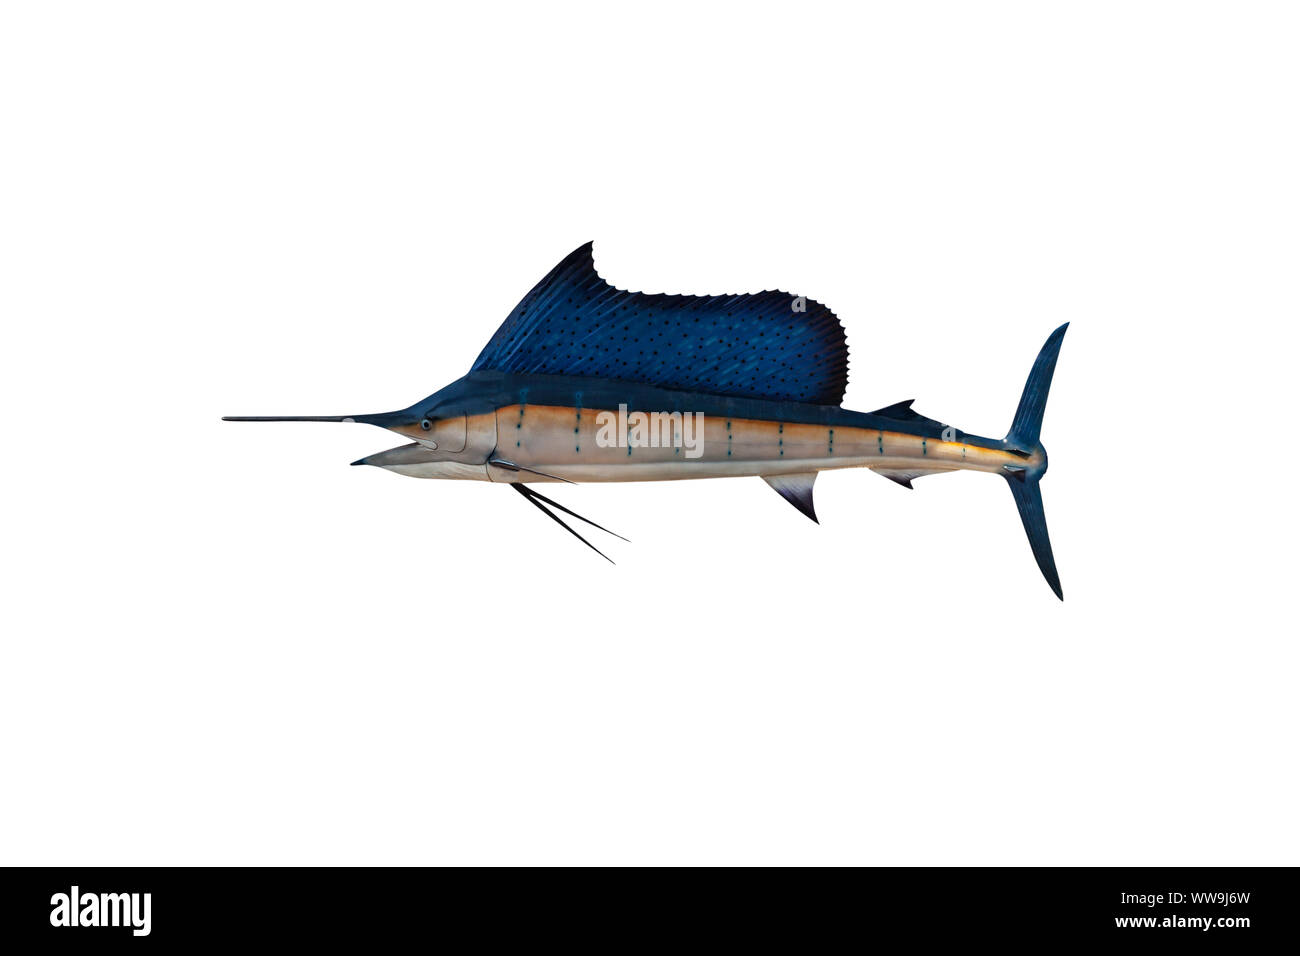 Marlin - Swordfish,Sailfish saltwater fish (Istiophorus) isolated on white background with clipping path. Stock Photo